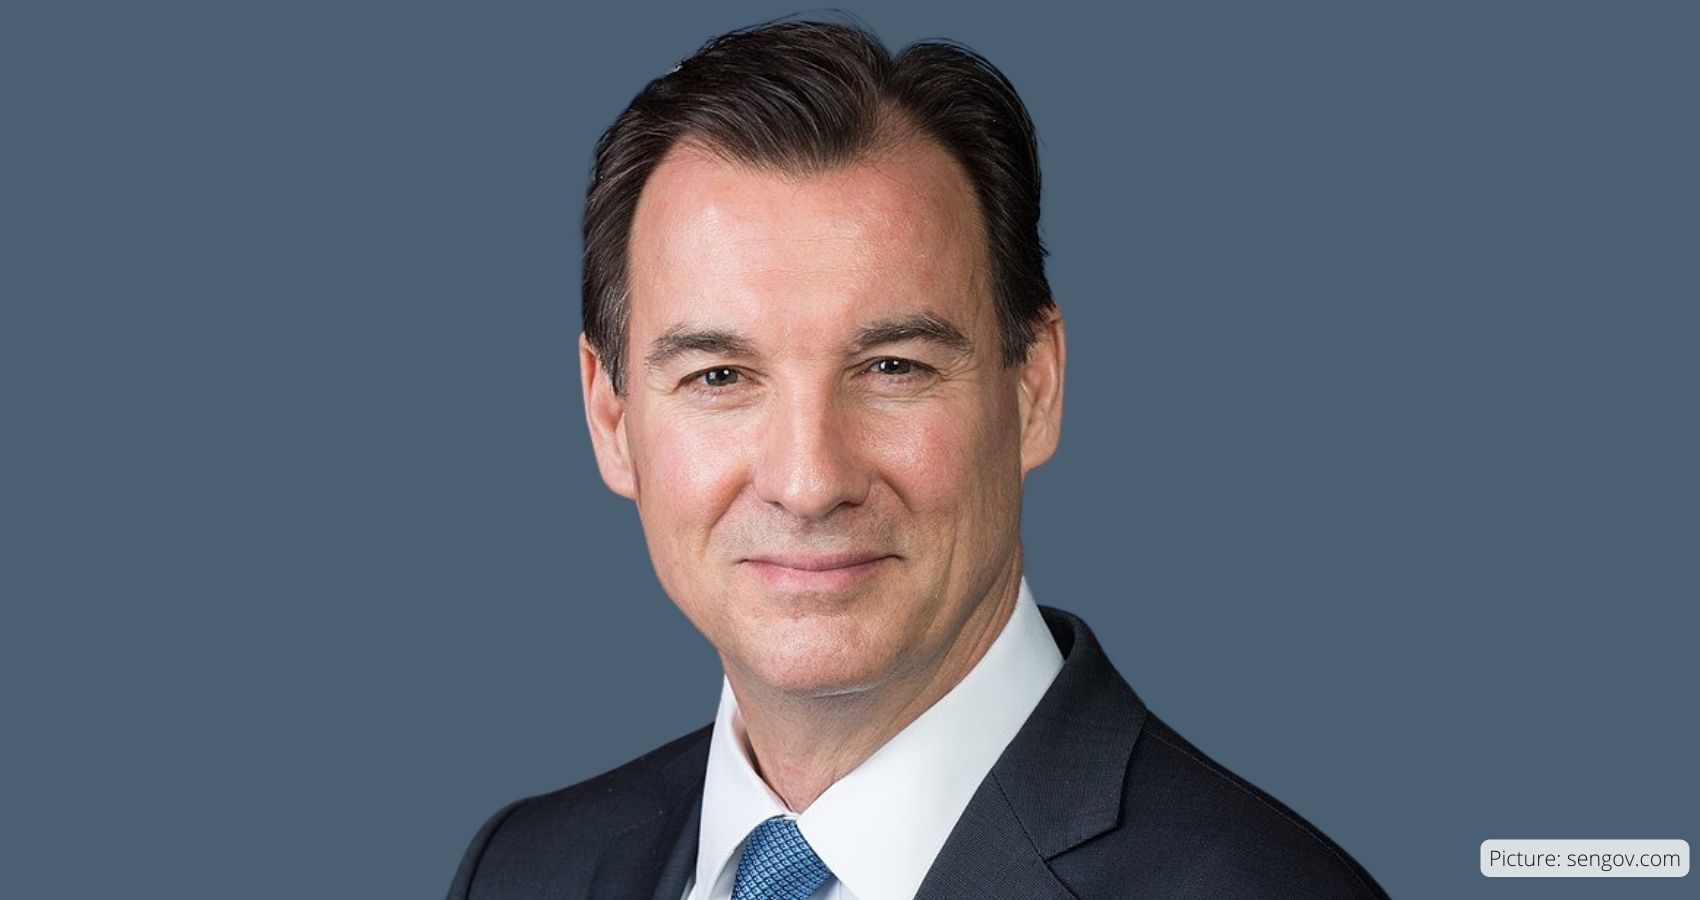 Congressman Suozzi Secures Victory in NY District 3 Special Election, Emphasizes Bipartisan Unity in Victory Speech